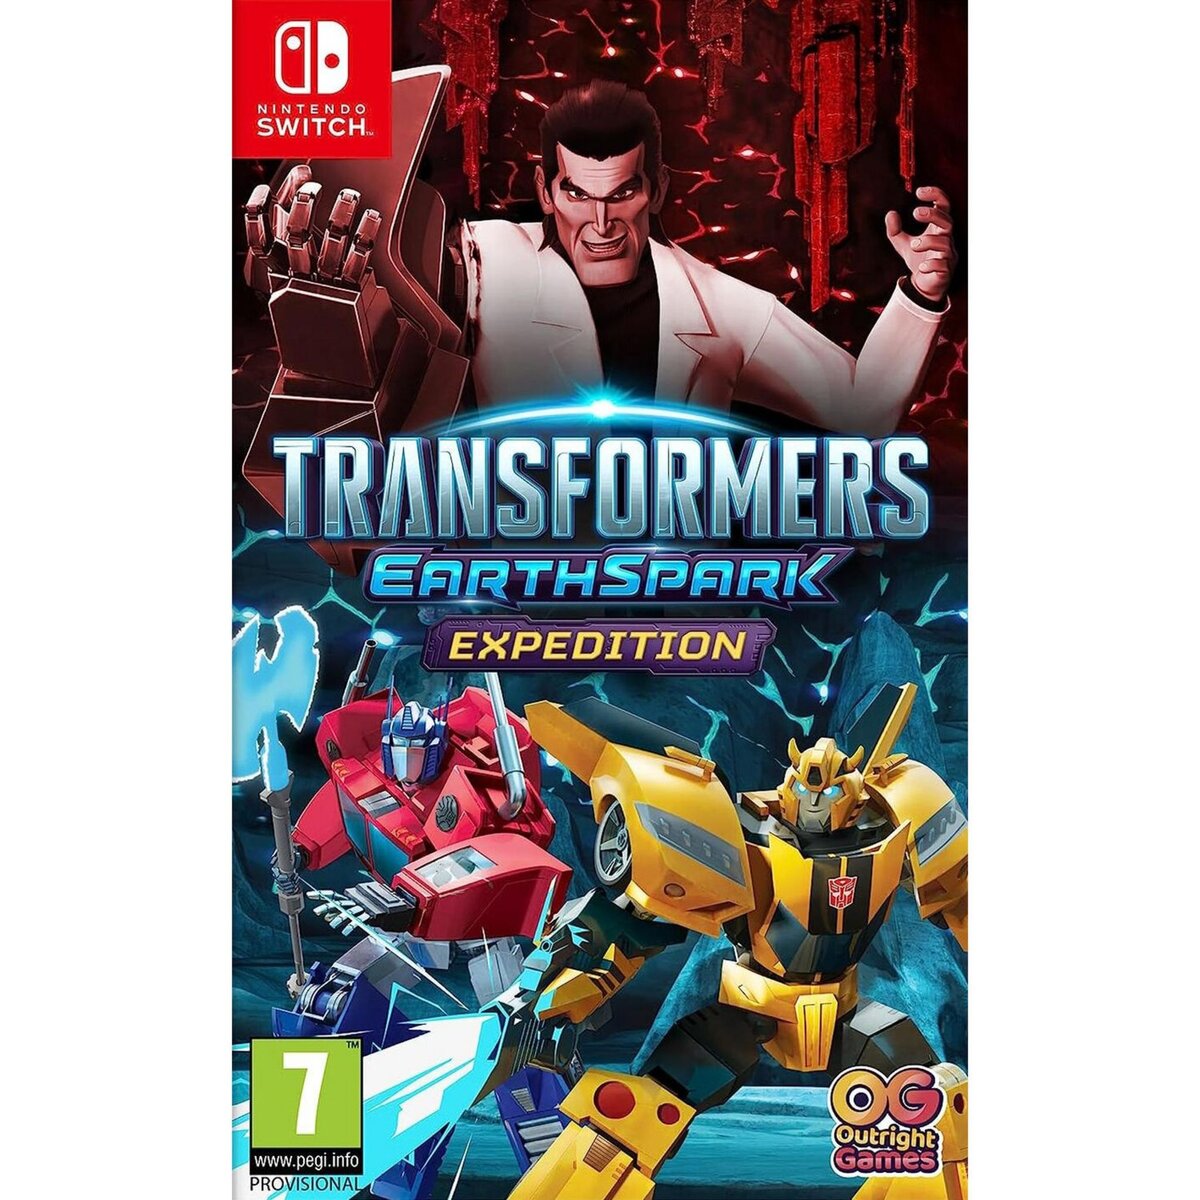 Transformers: Earthspark - Expedition Nintendo Switch